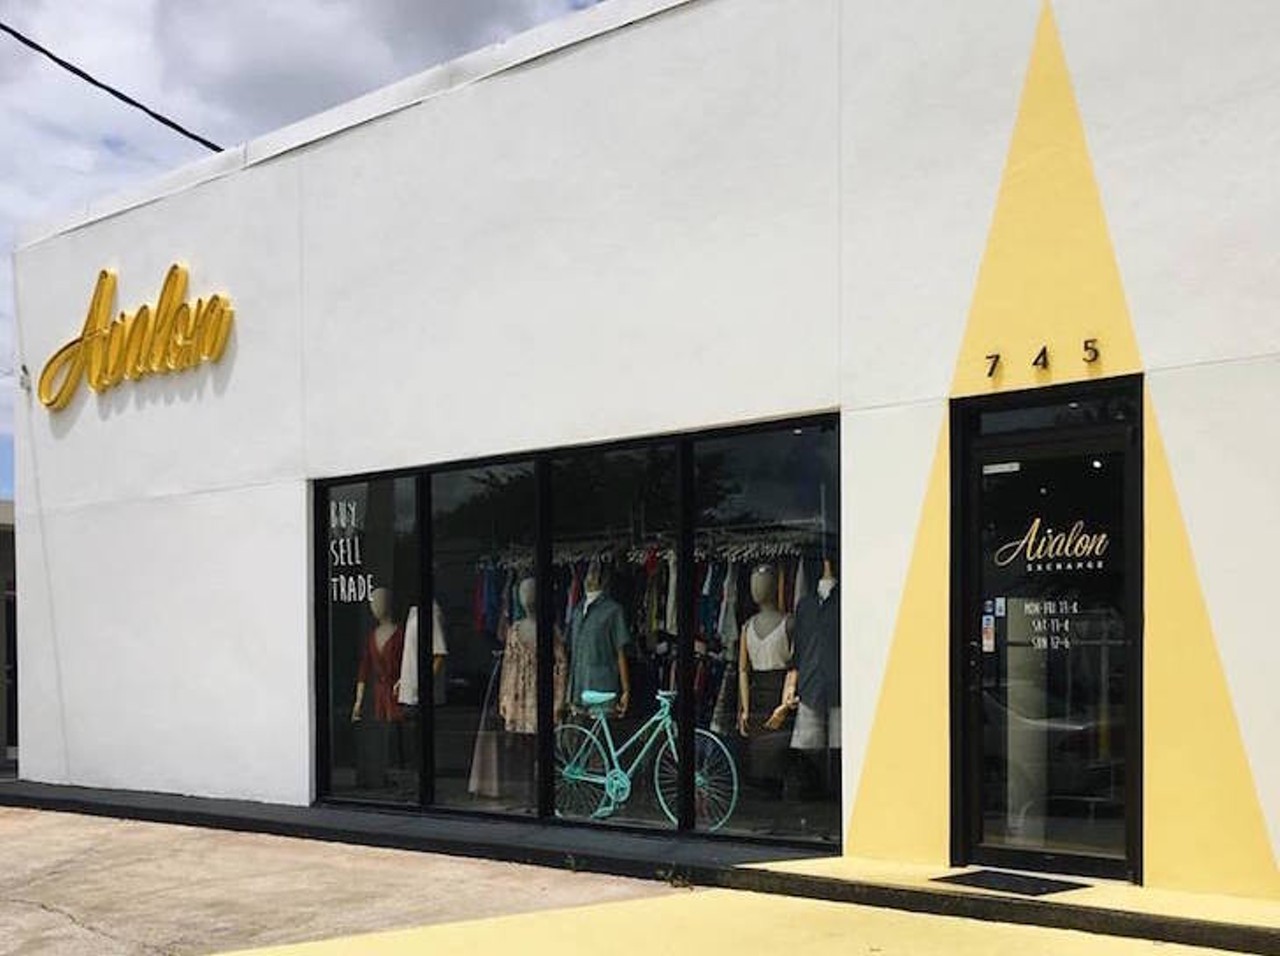 Avalon Exchange
745 Orange Ave., 407-636-9304 
Clean and modern, the spacious store breathes new life into the local resale game. With mostly contemporary and name-brand clothing, the store is ideal for swapping old clothes for store credit.
Photo via Avalon Exchange Florida/Facebook